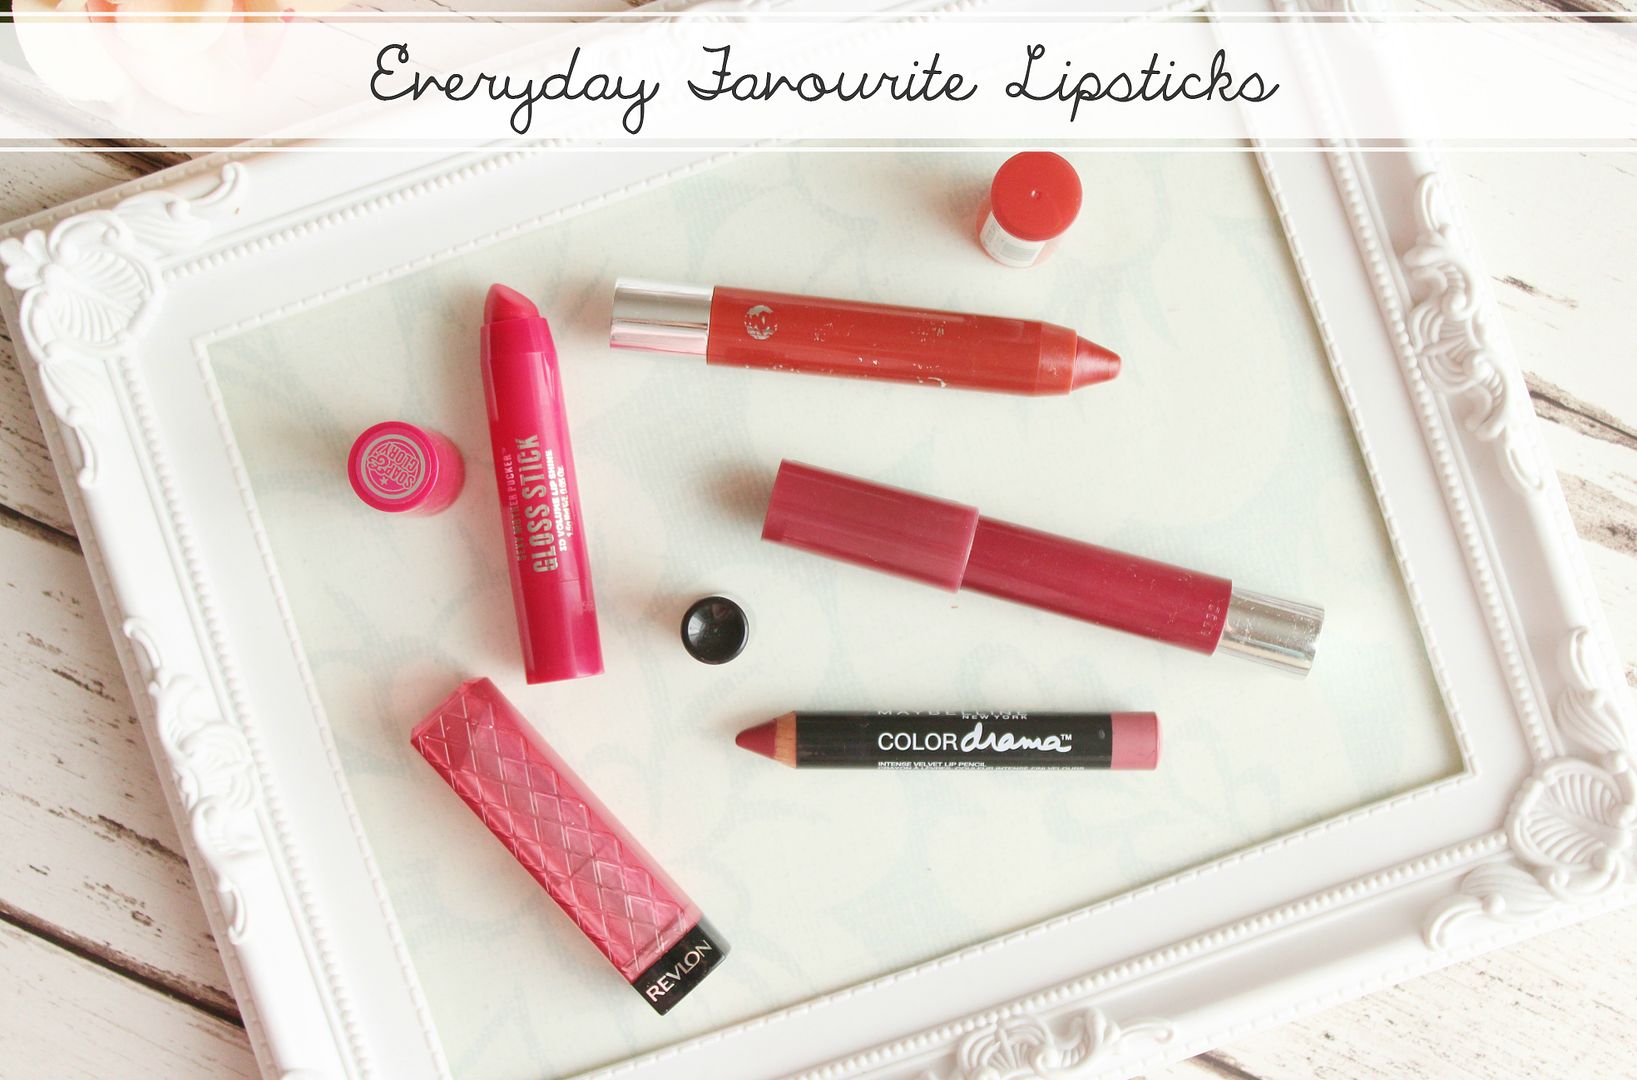 Current-Favourite-Daytime-Red-Pink-Lipsticks-Soap-And-Glory-Revlon-Bourjois-Maybelline-Belle-Amie-UK-Beauty-Fashion-Lifestyle-Blog